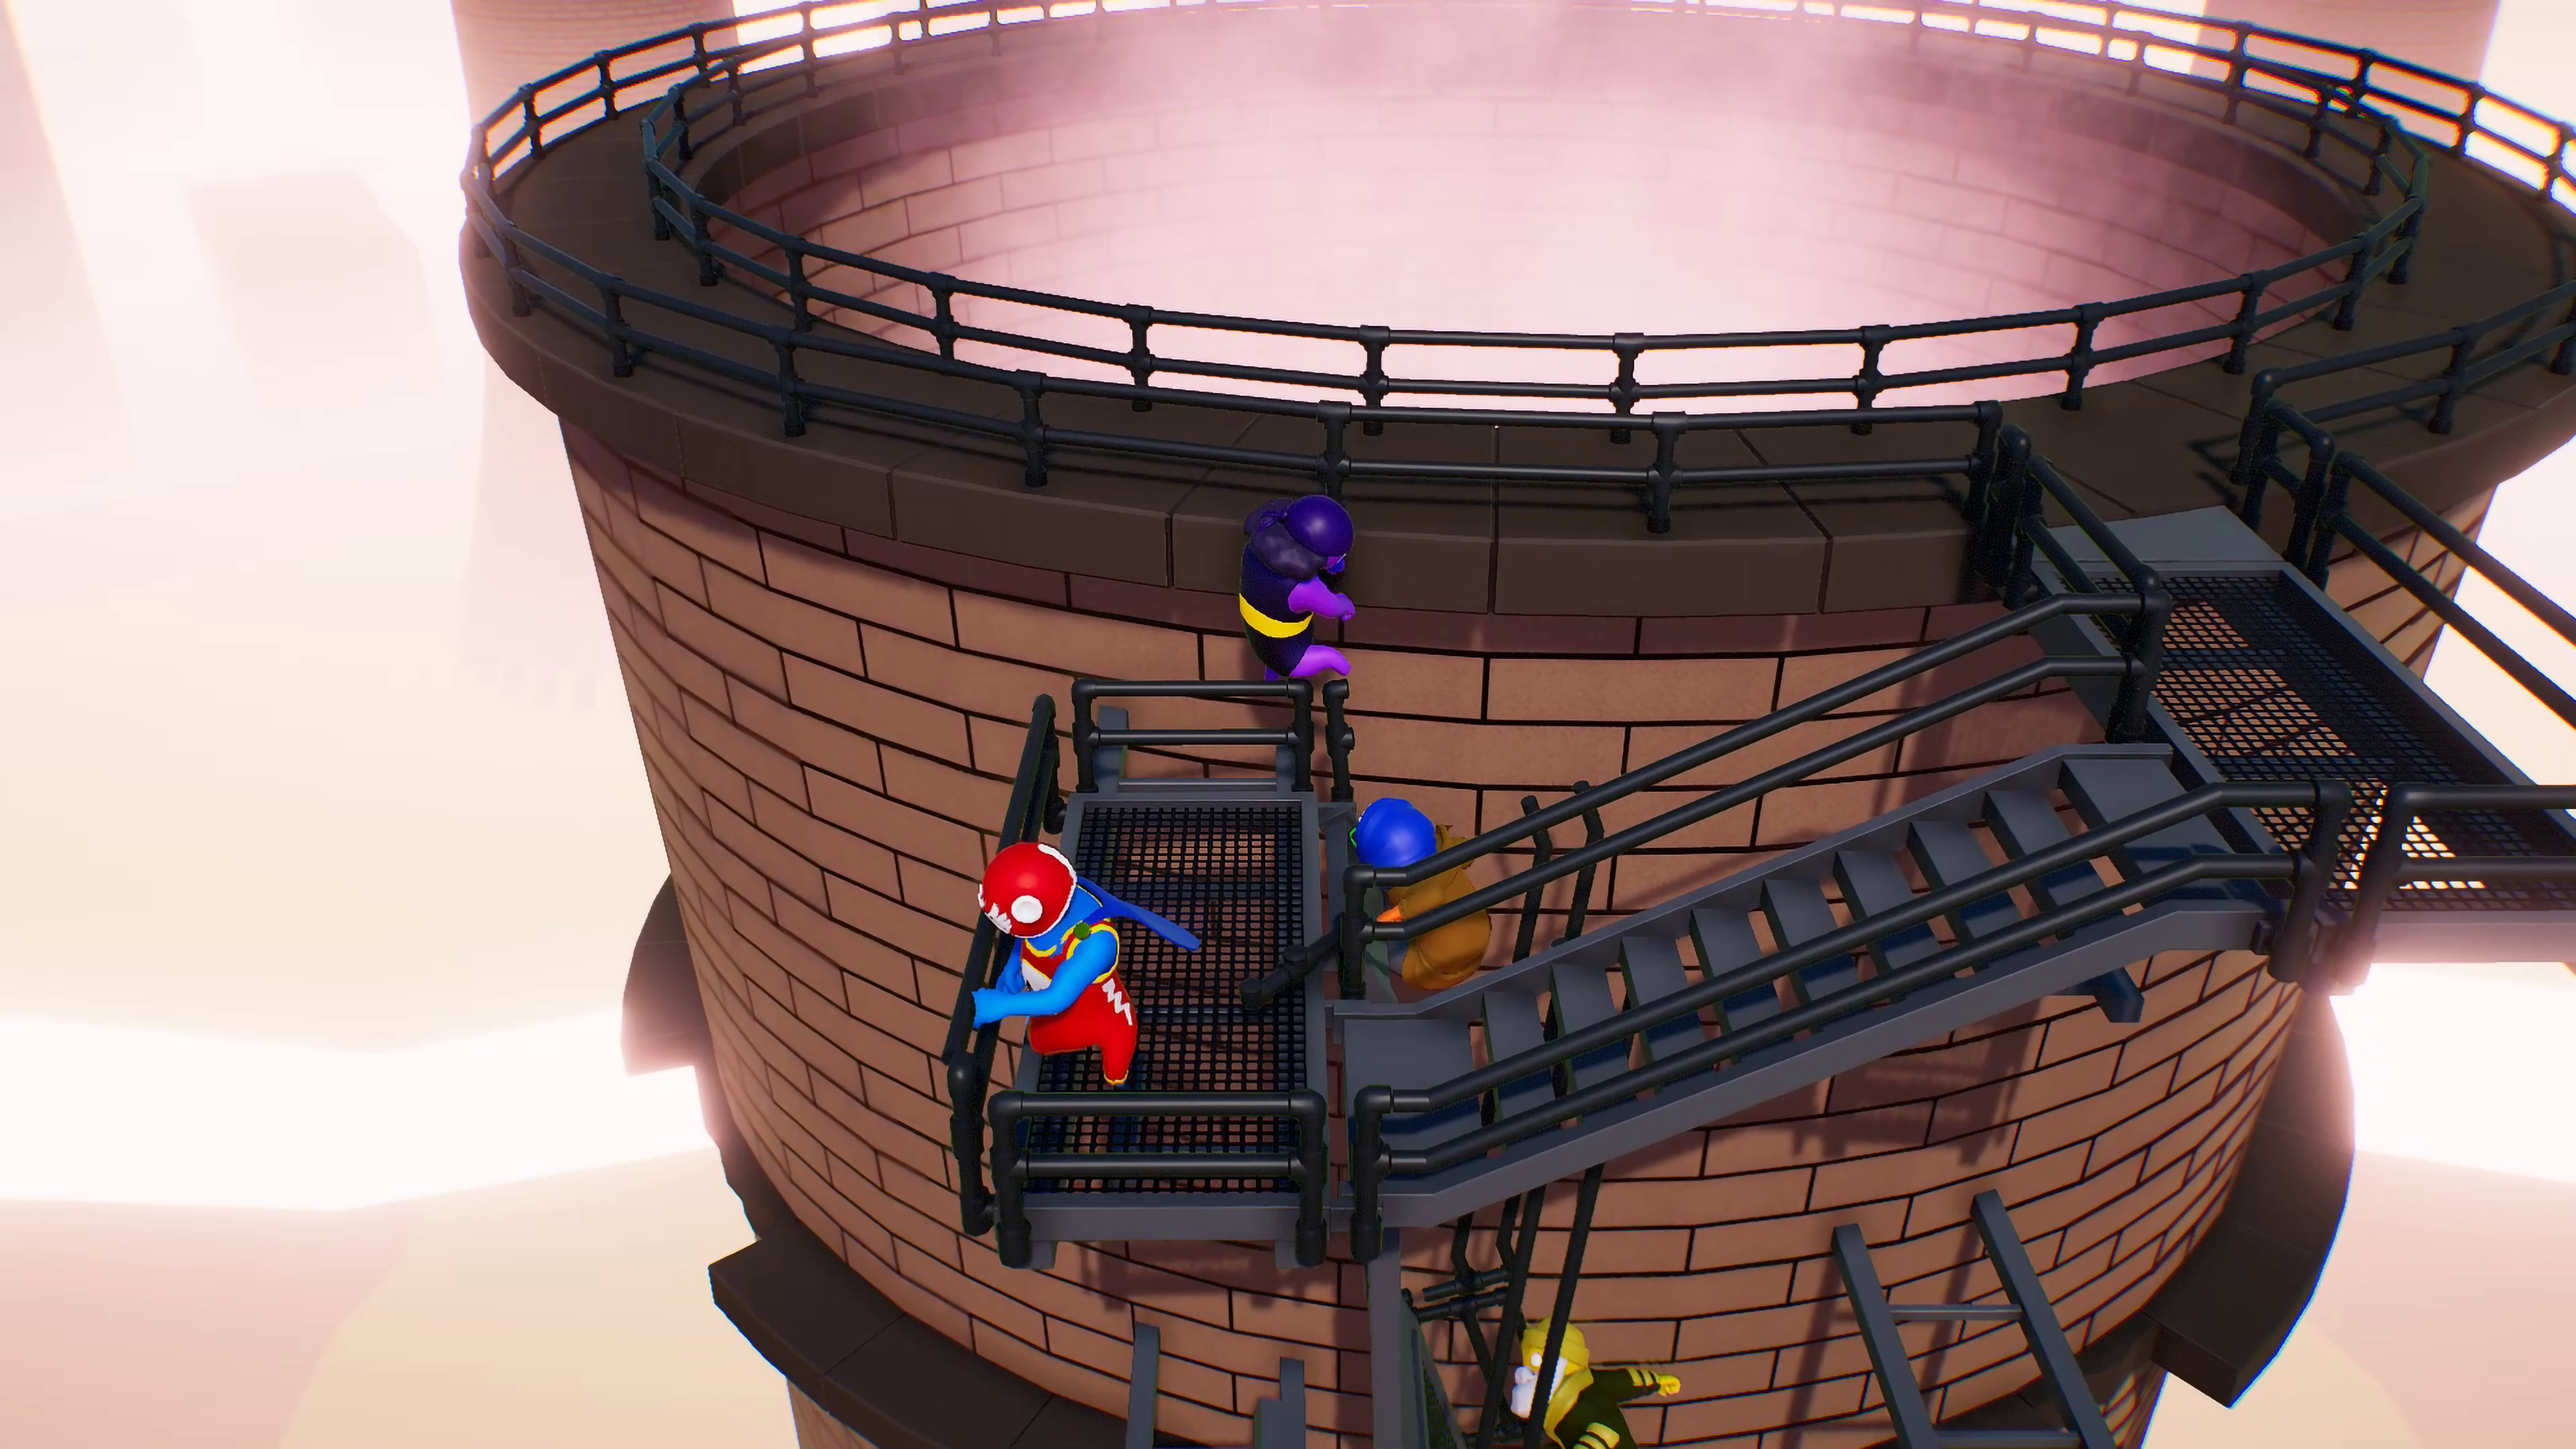 gang beasts review